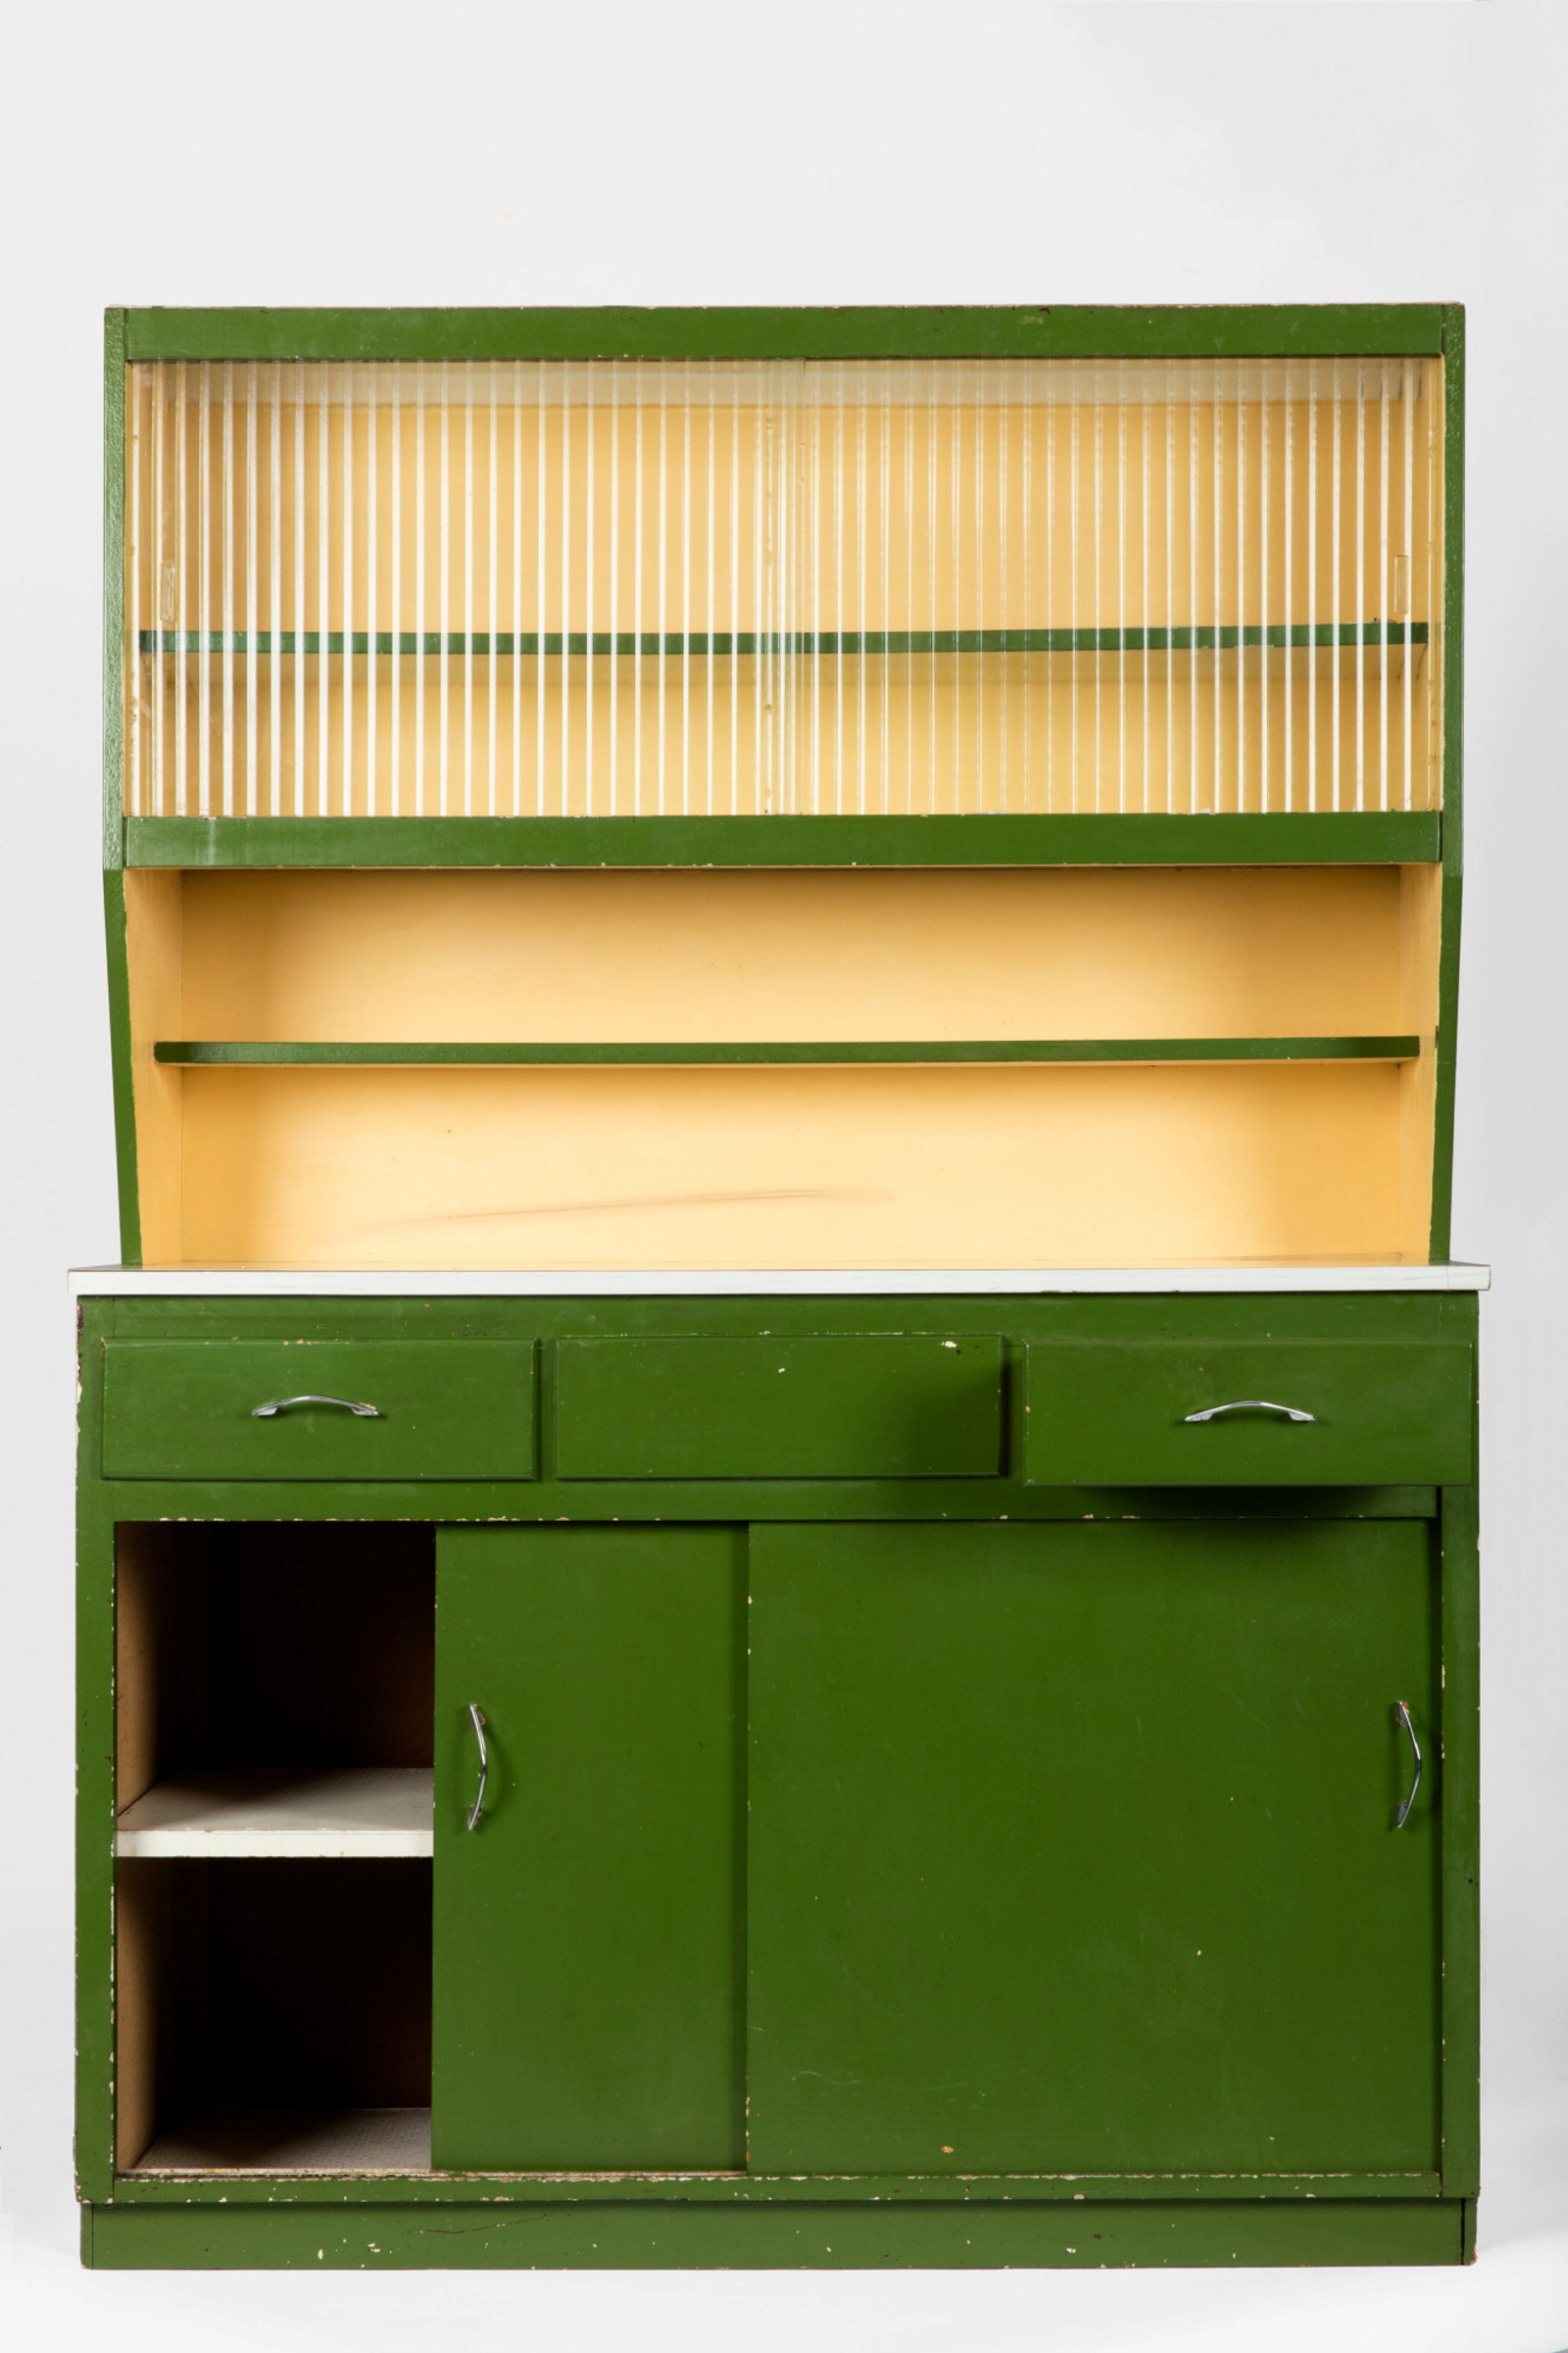 Green drawers with cream shelving above.